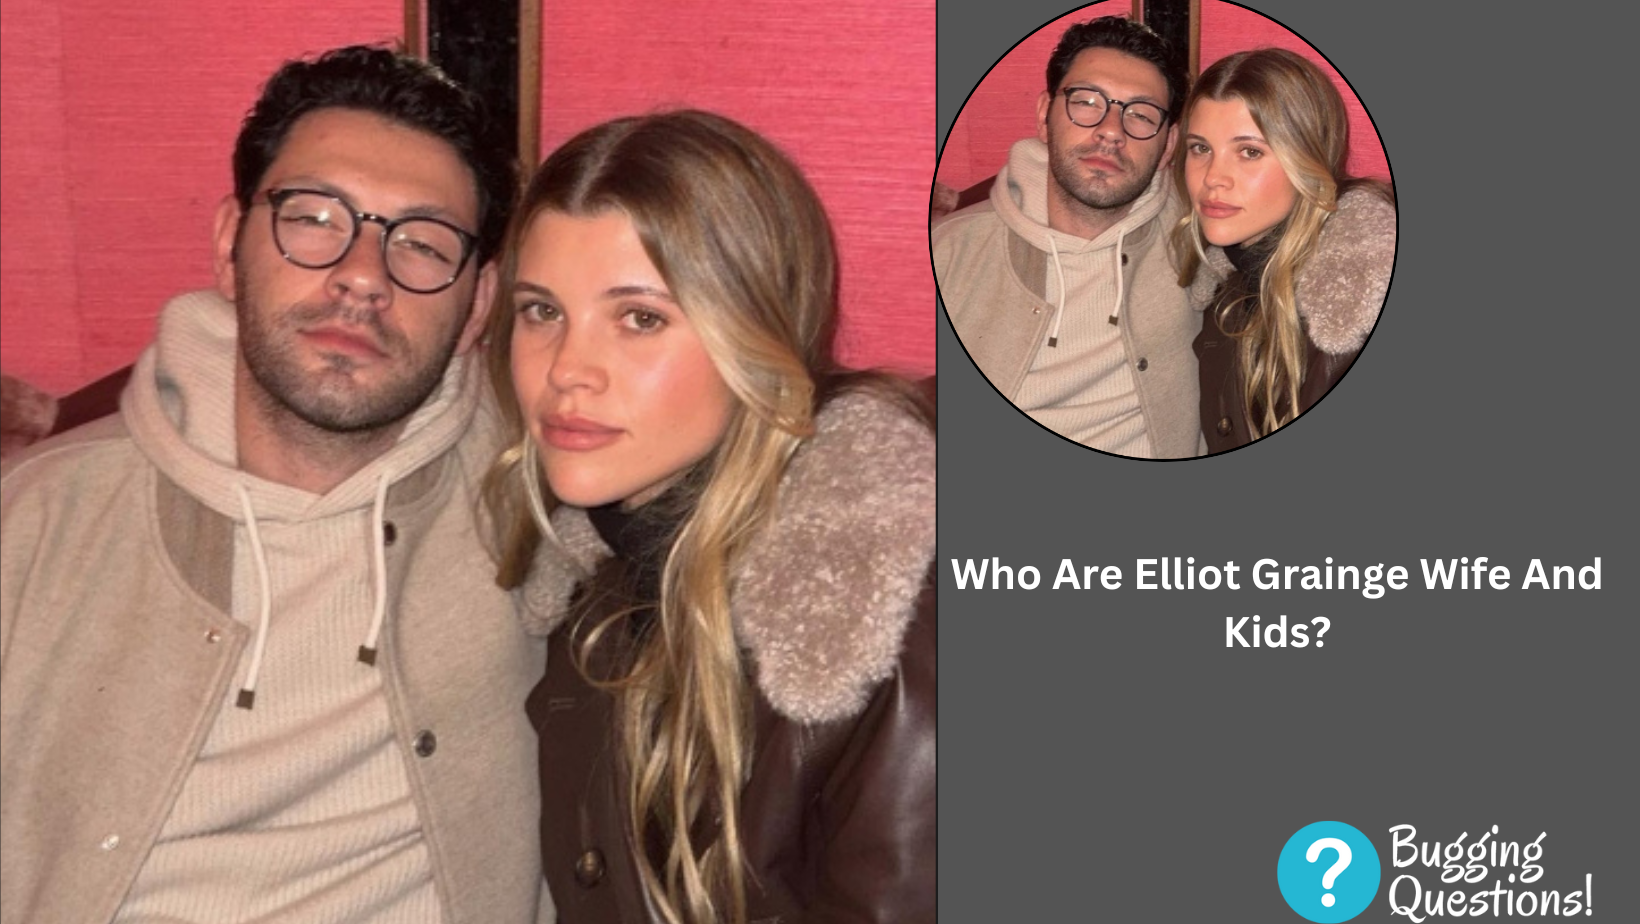 Who Are Elliot Grainge Wife And Kids?